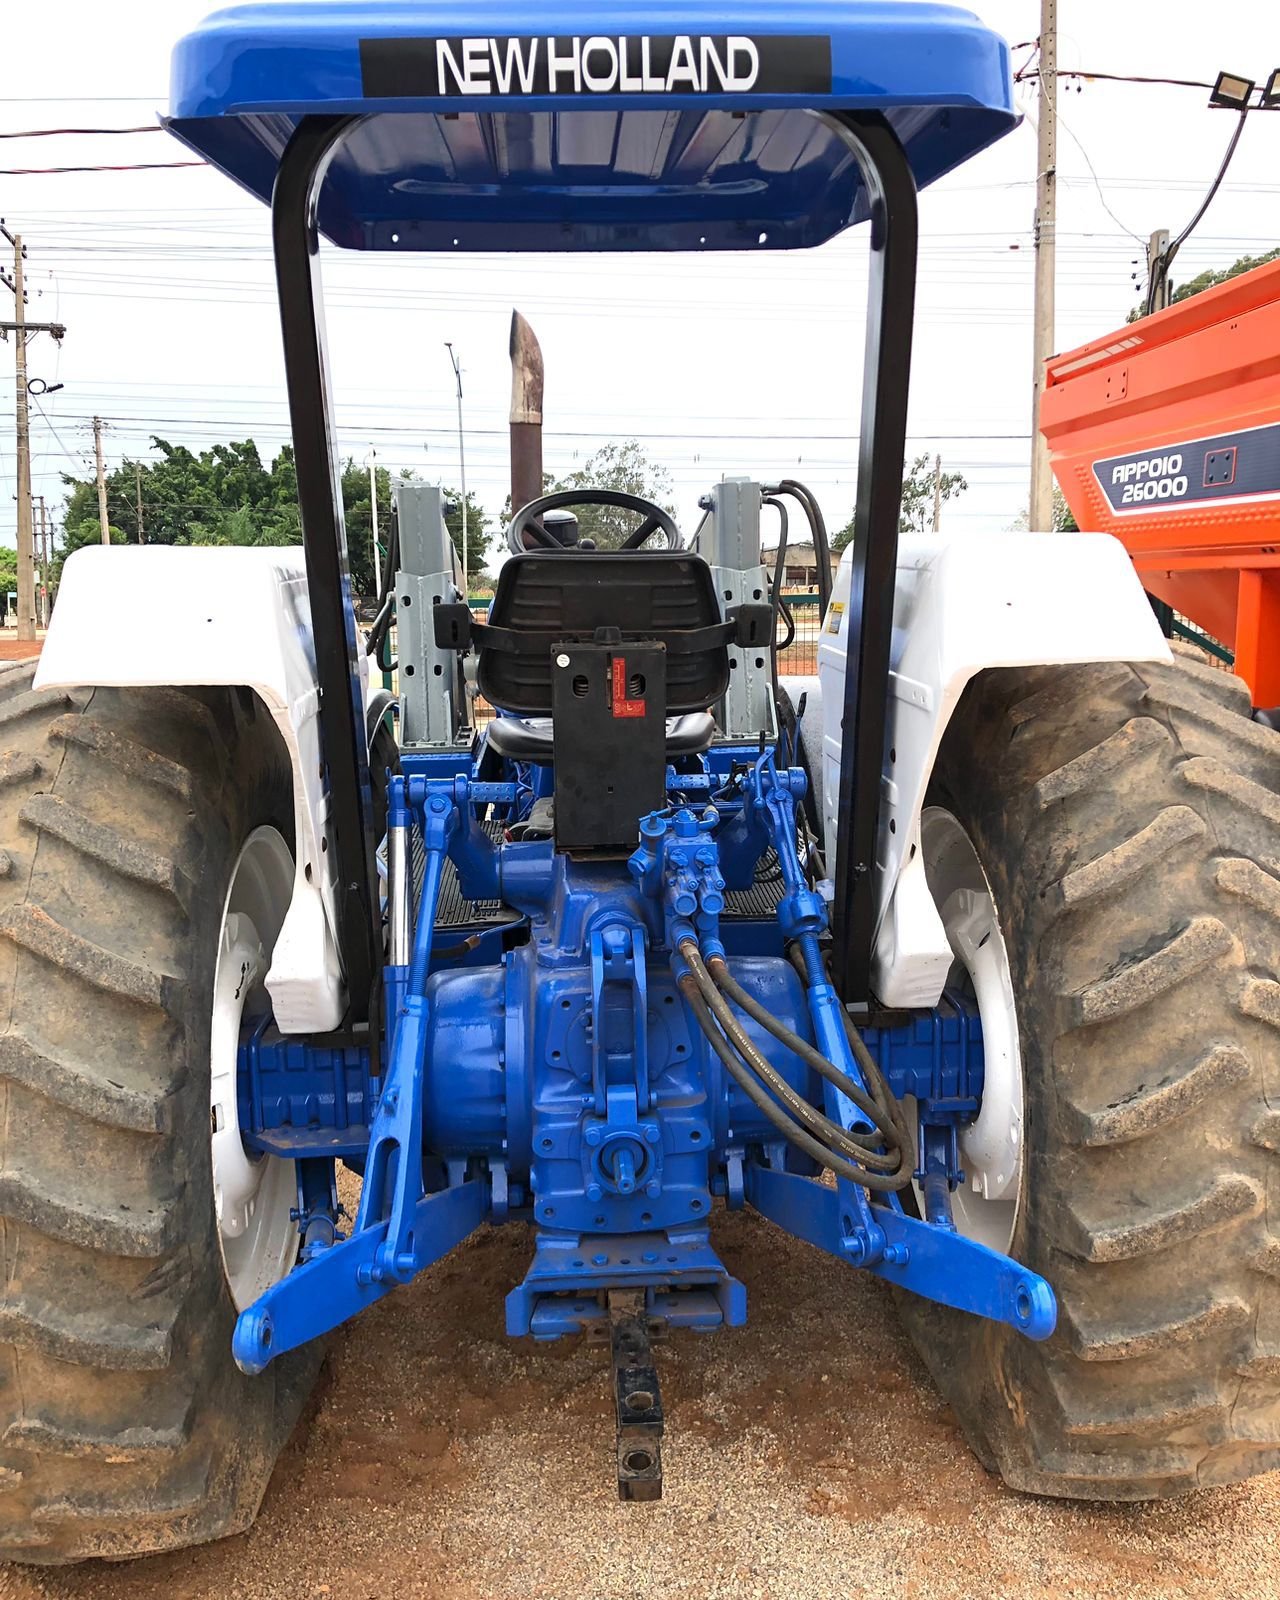 Trator New Holland 7630, Ano 2000